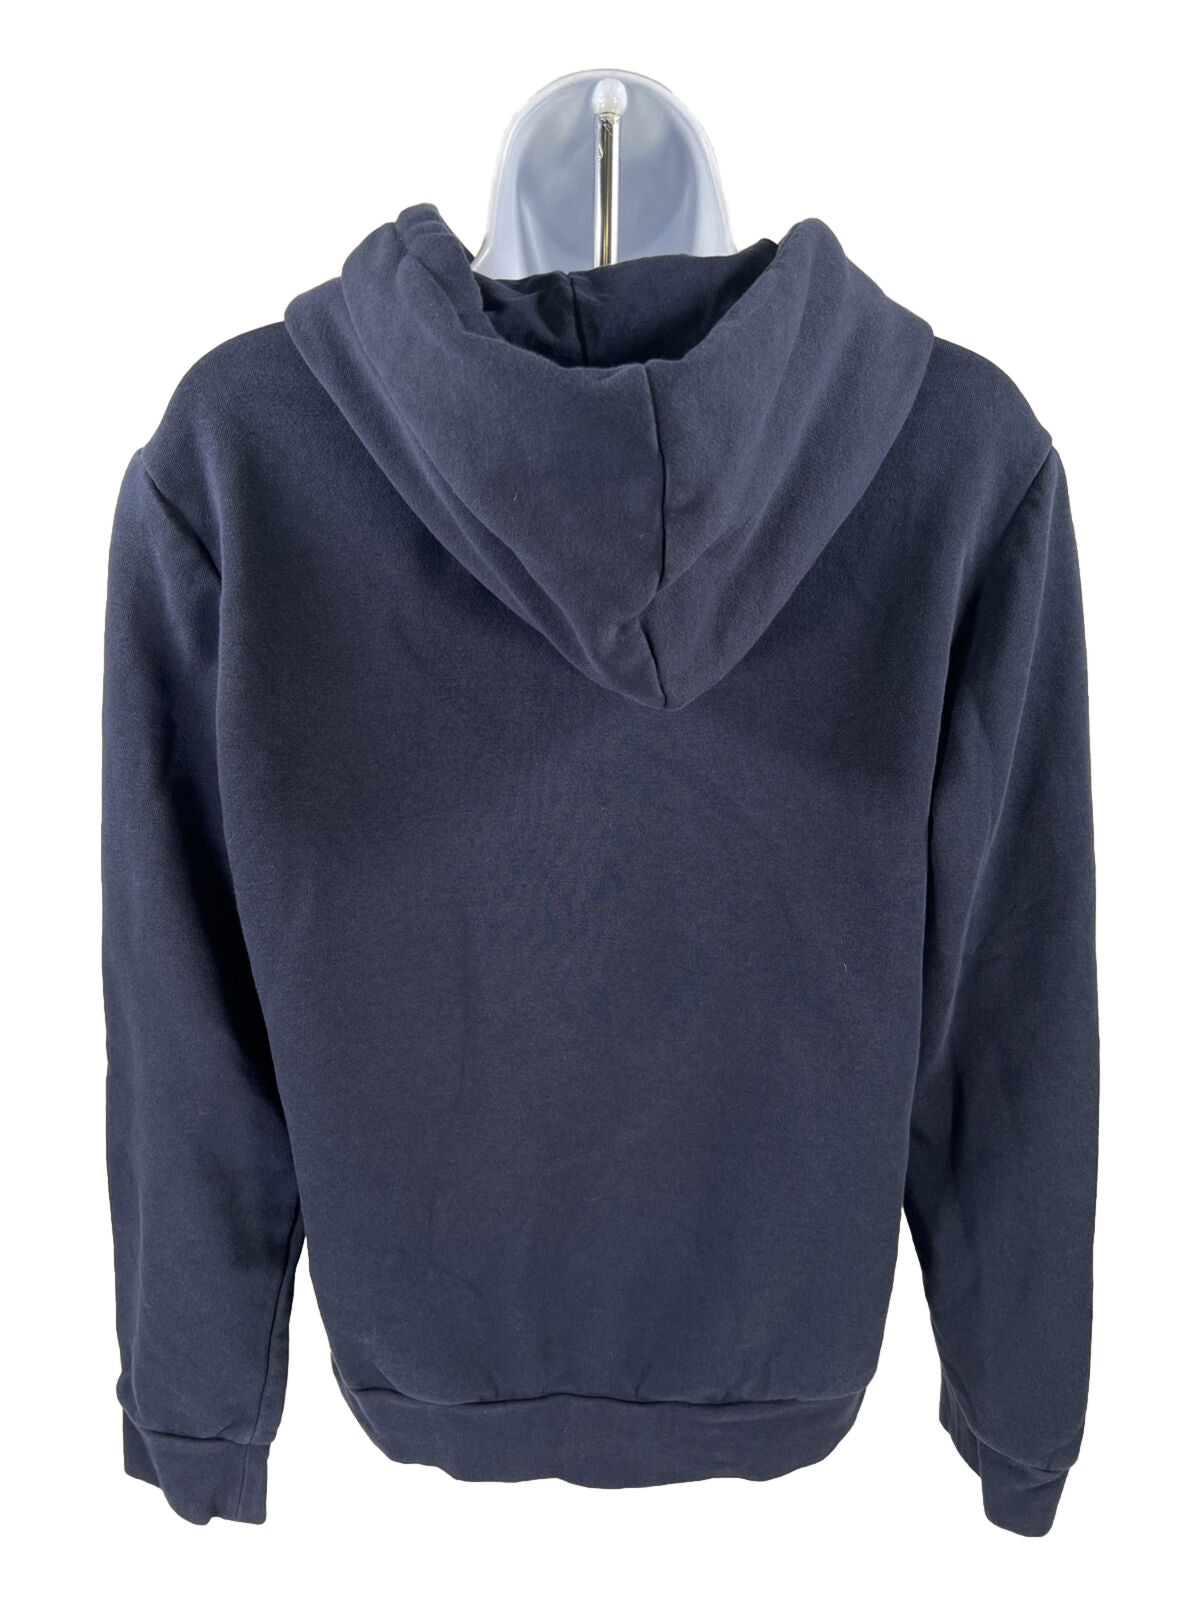 Adidas Women's Navy Blue Logo Graphic Fleece Lined Pullover Hoodie - M